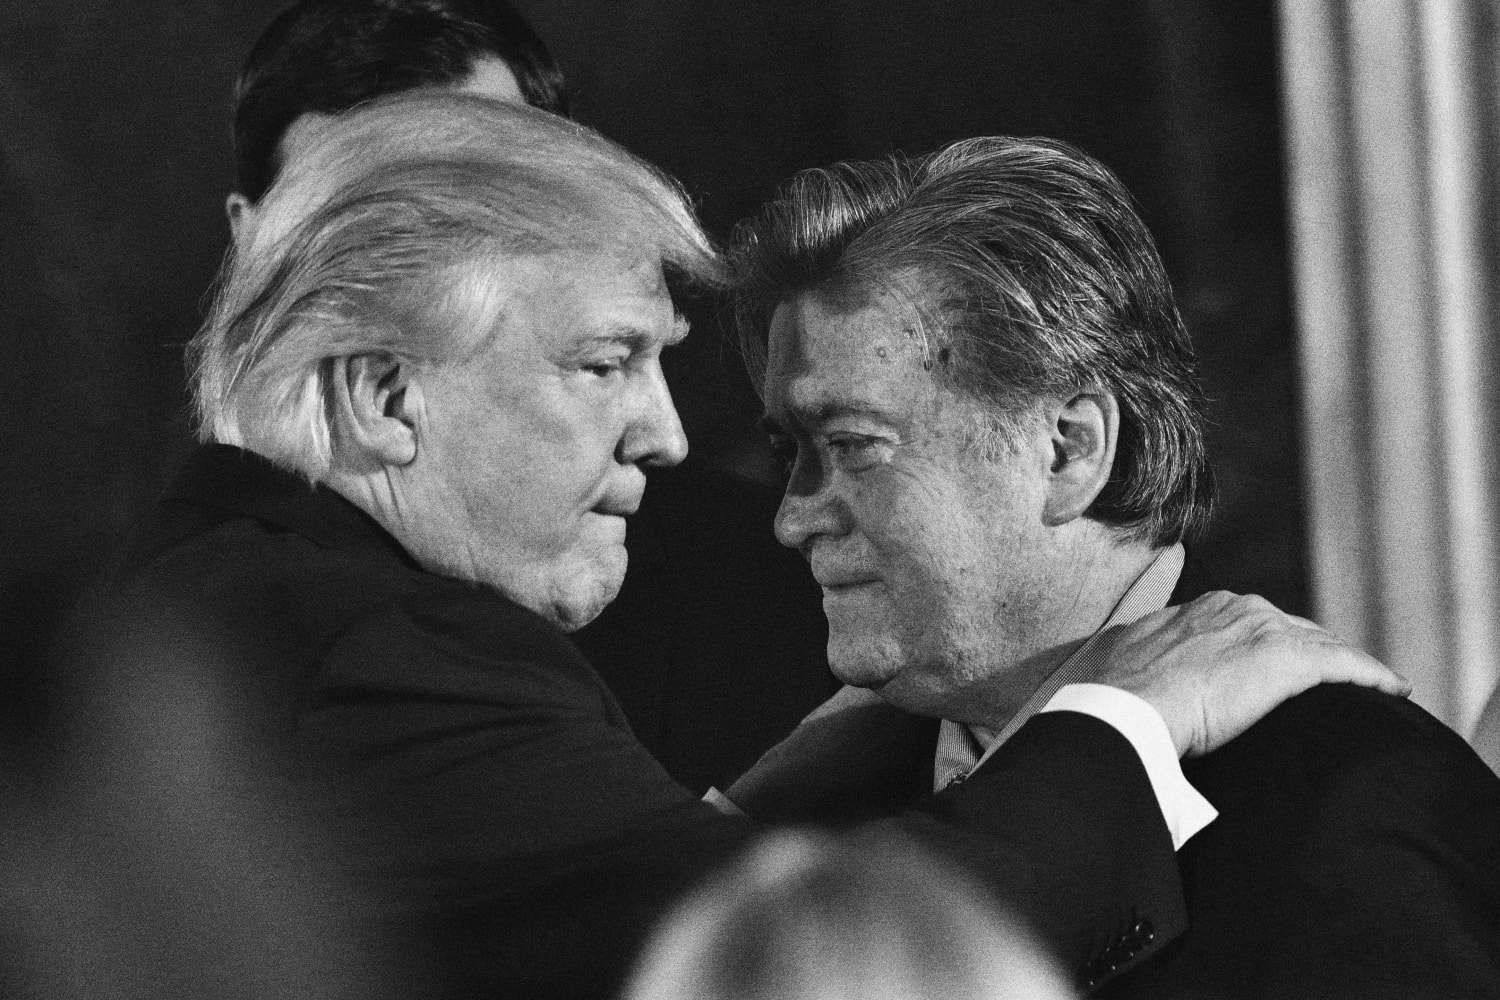 What could be Trump’s Jan. 6 endgame? Look at his letter to Bannon.